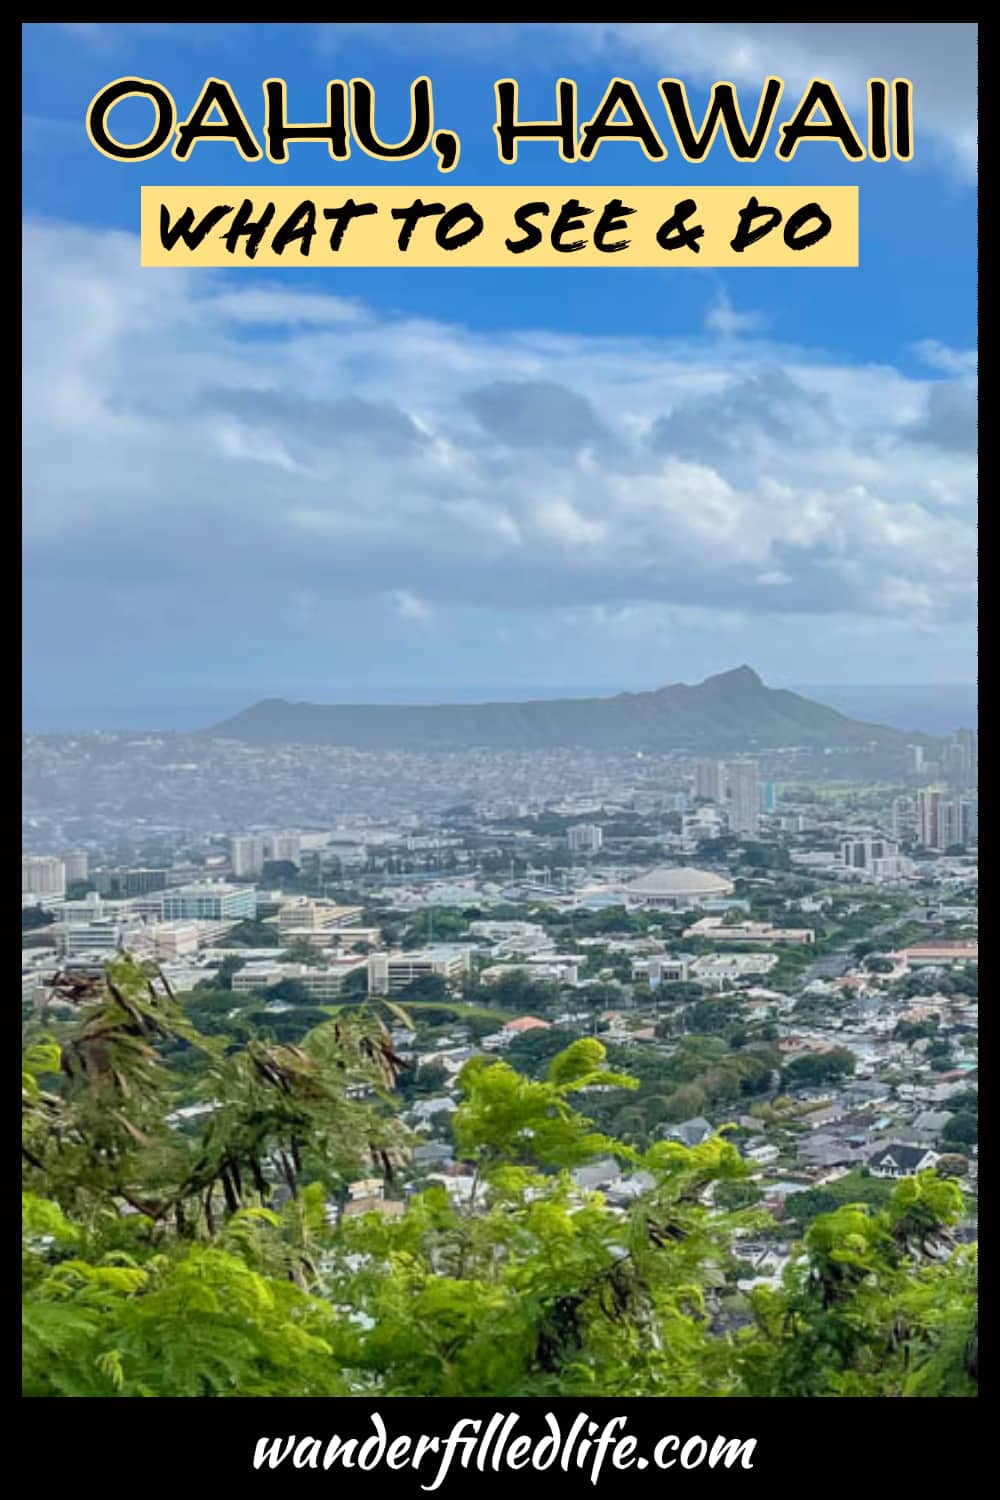 Headed to Honolulu, Hawaii and trying to figure out what to do? Check out our roundup of the best places to go on Oahu.